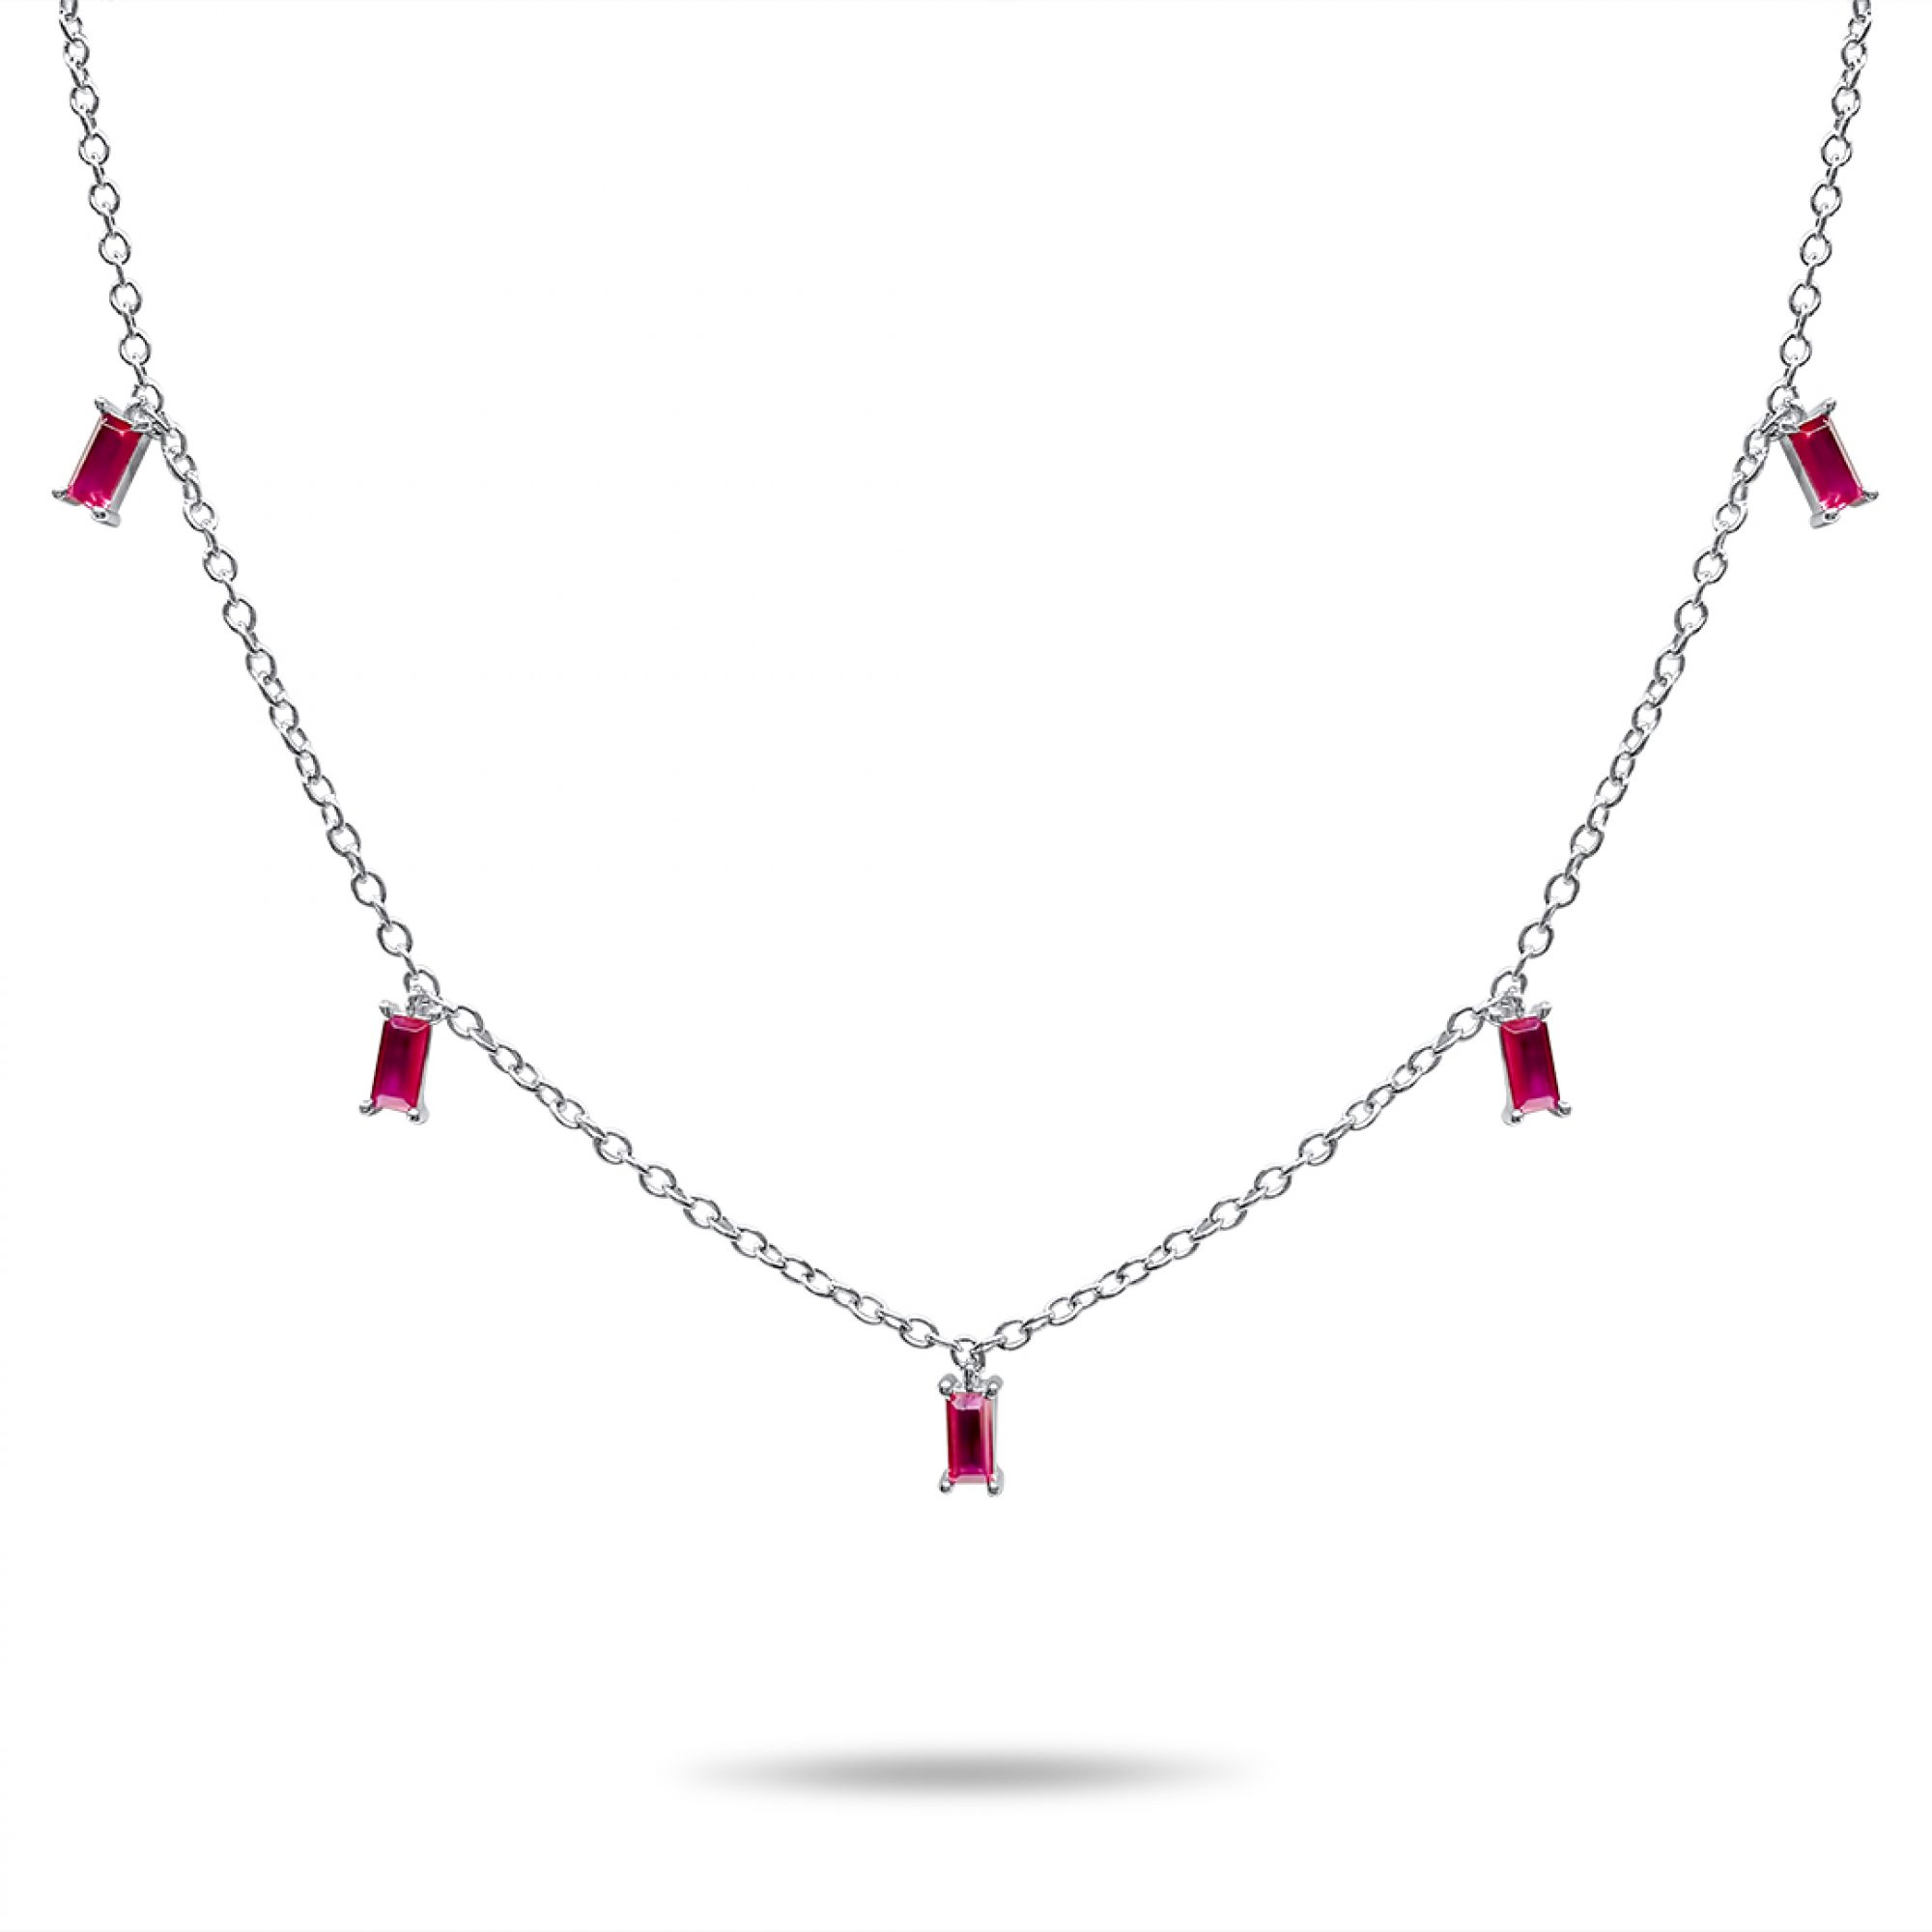 Dangle necklace with ruby stones